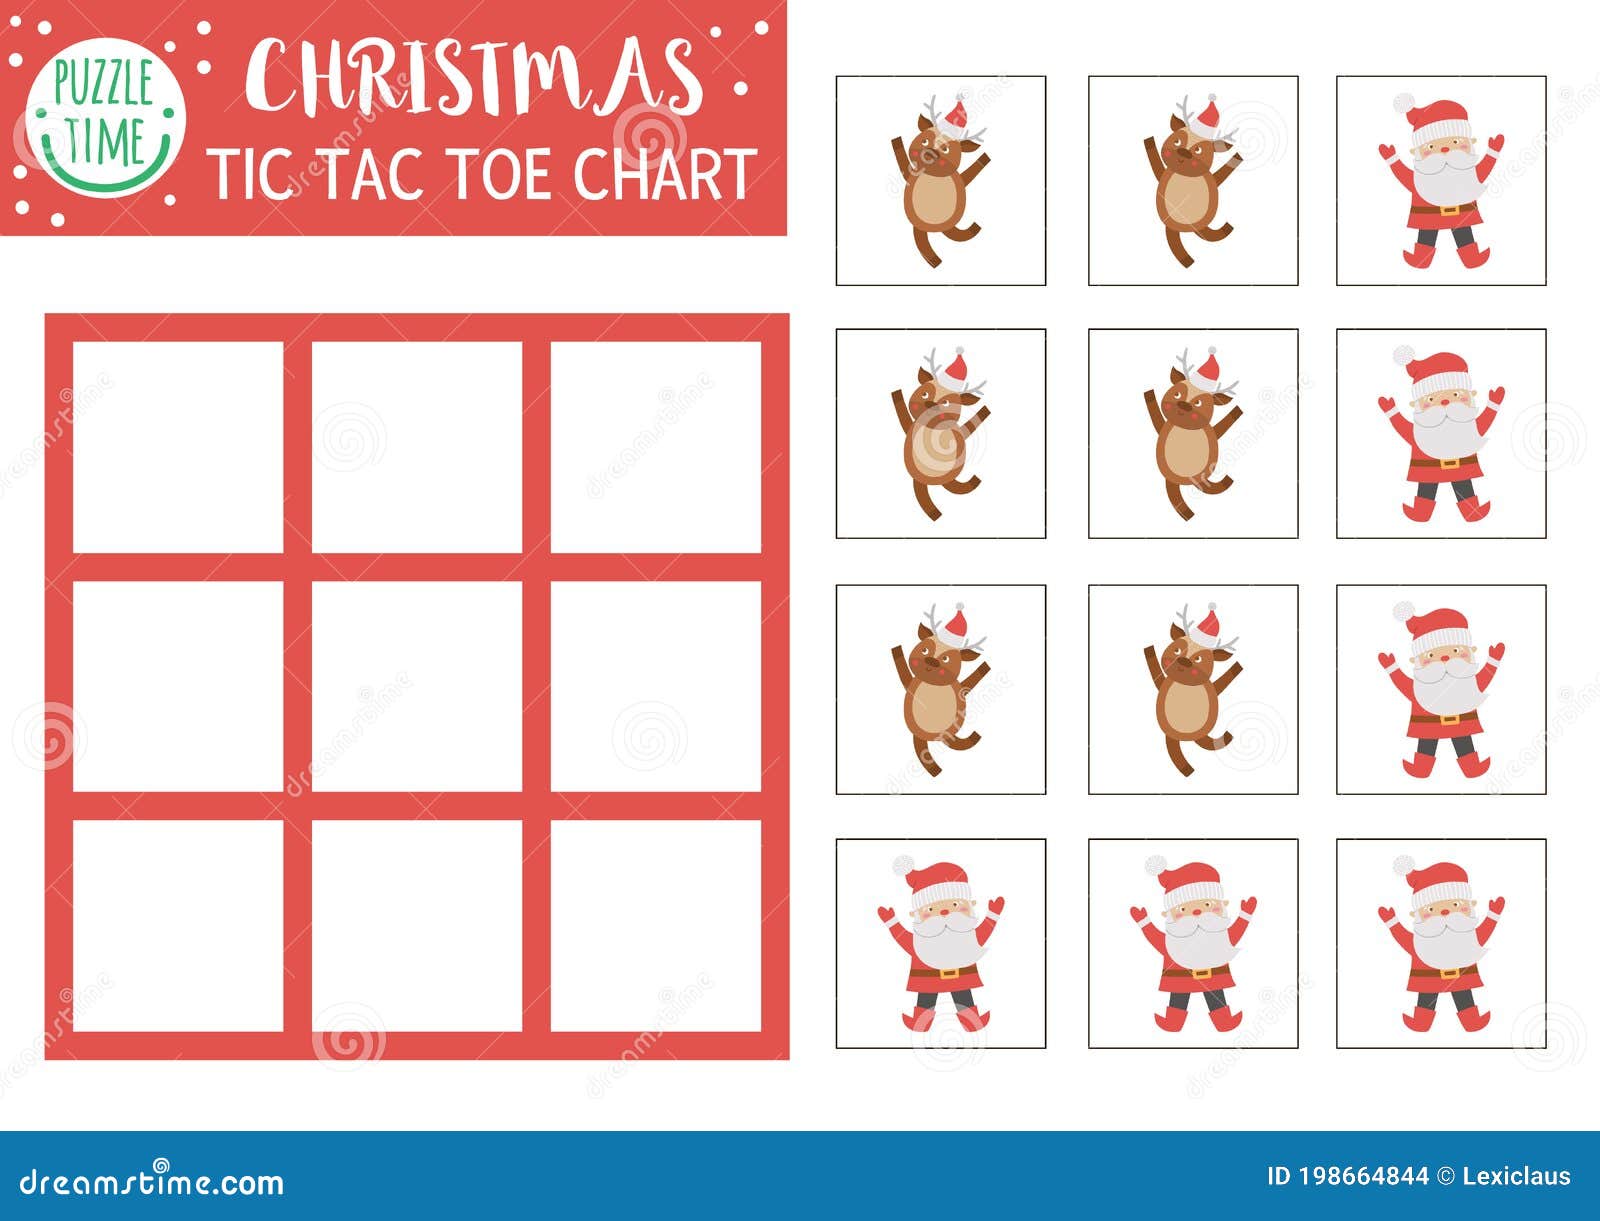  christmas tic tac toe chart with cute deer and santa claus. winter board game playing field with traditional characters.